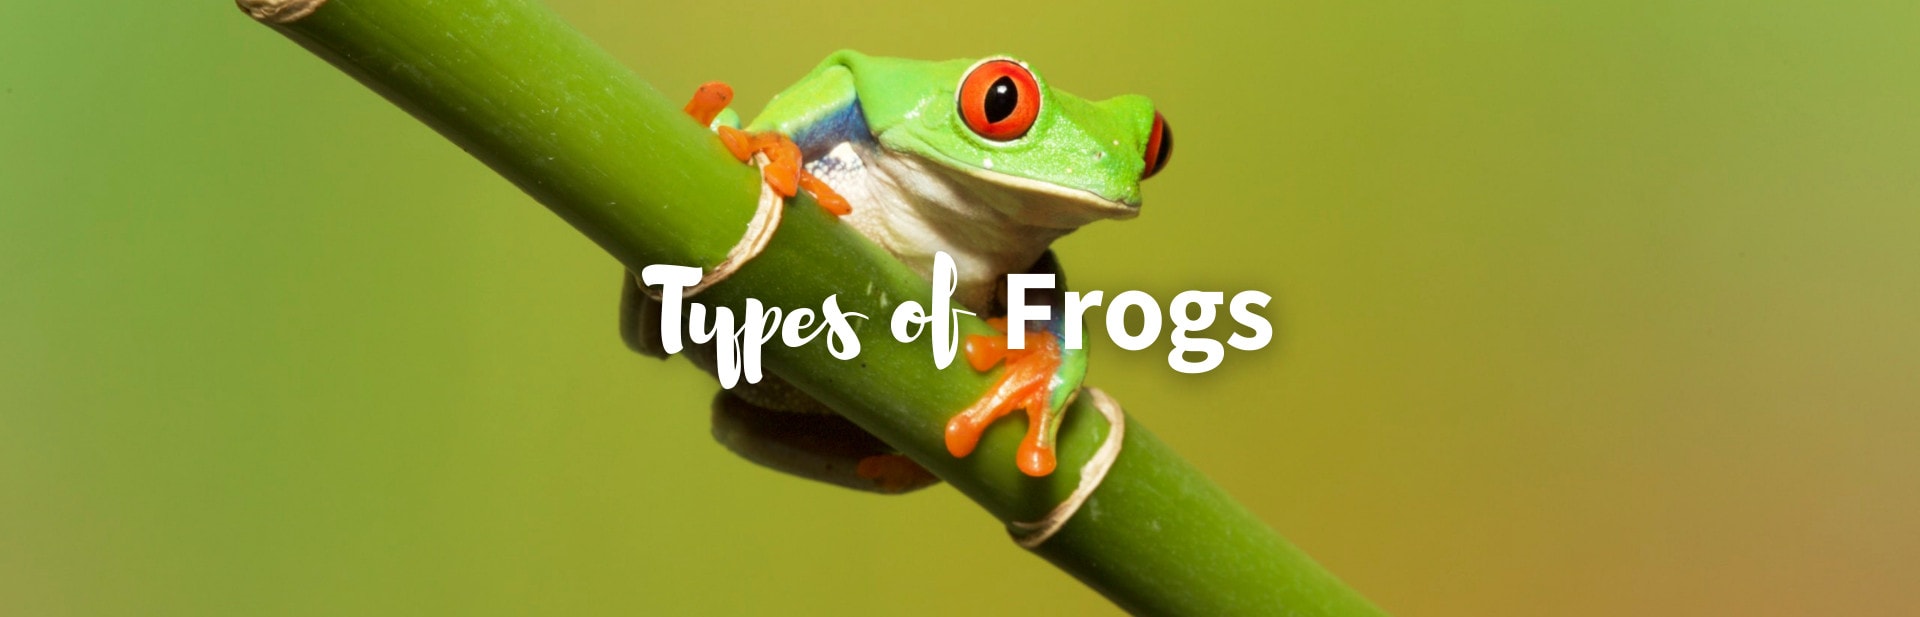 23 Amazing Types of Frogs From Around the World